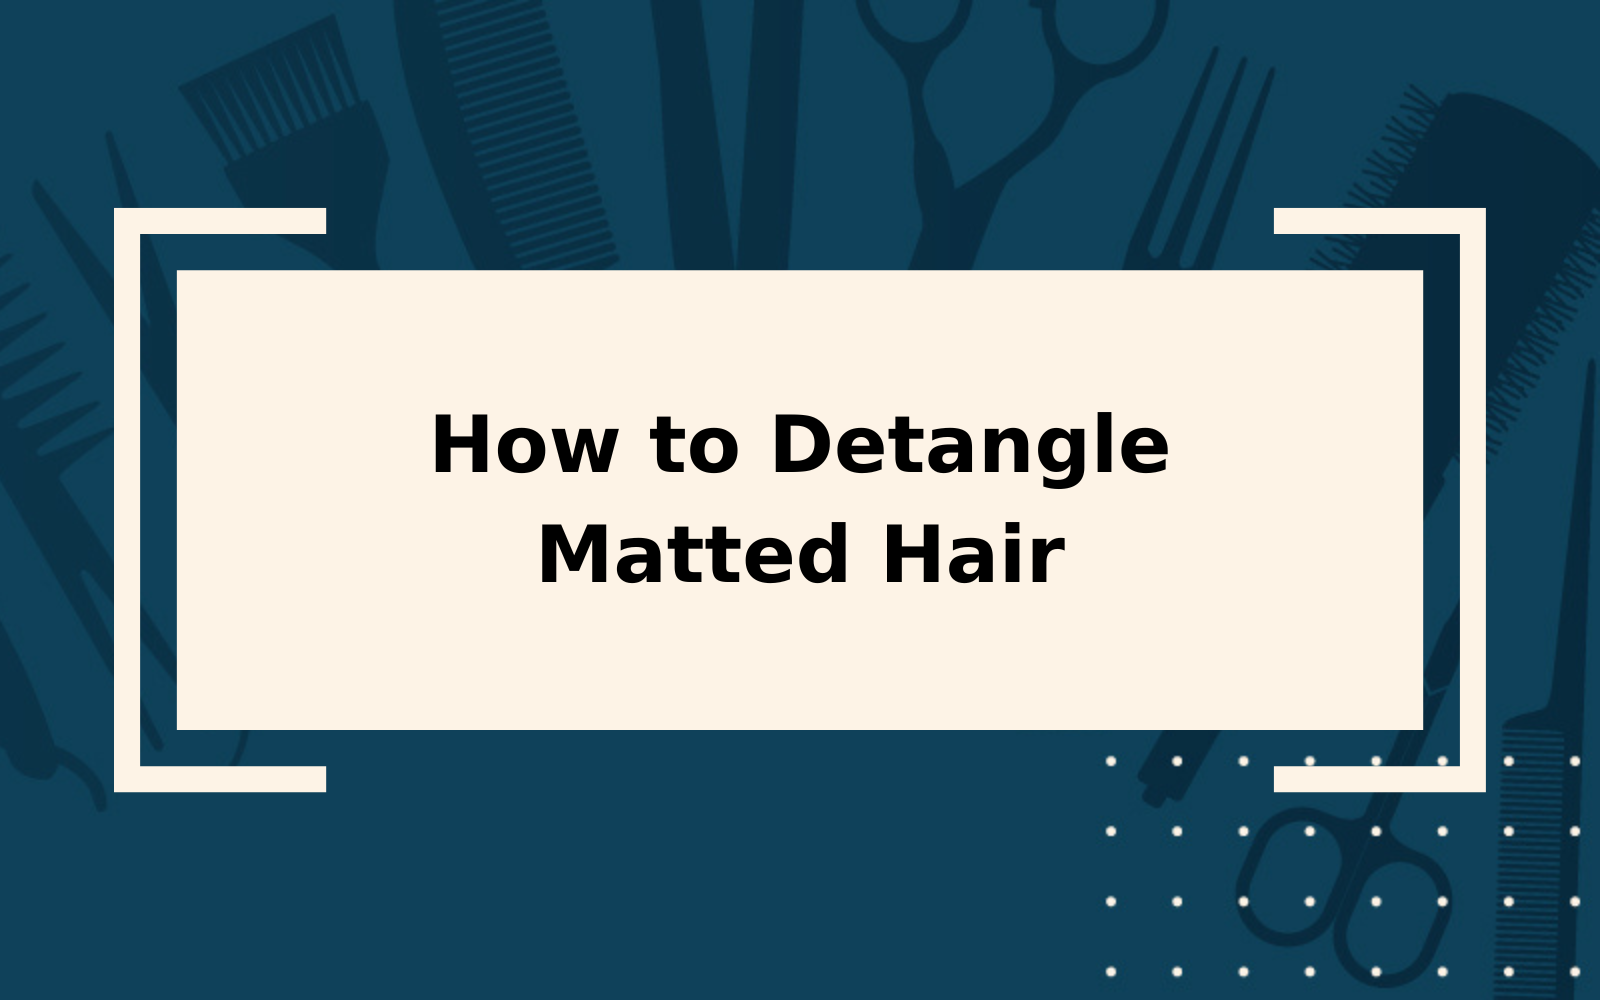 How to Detangle Matted Hair | Step-by-Step Guide